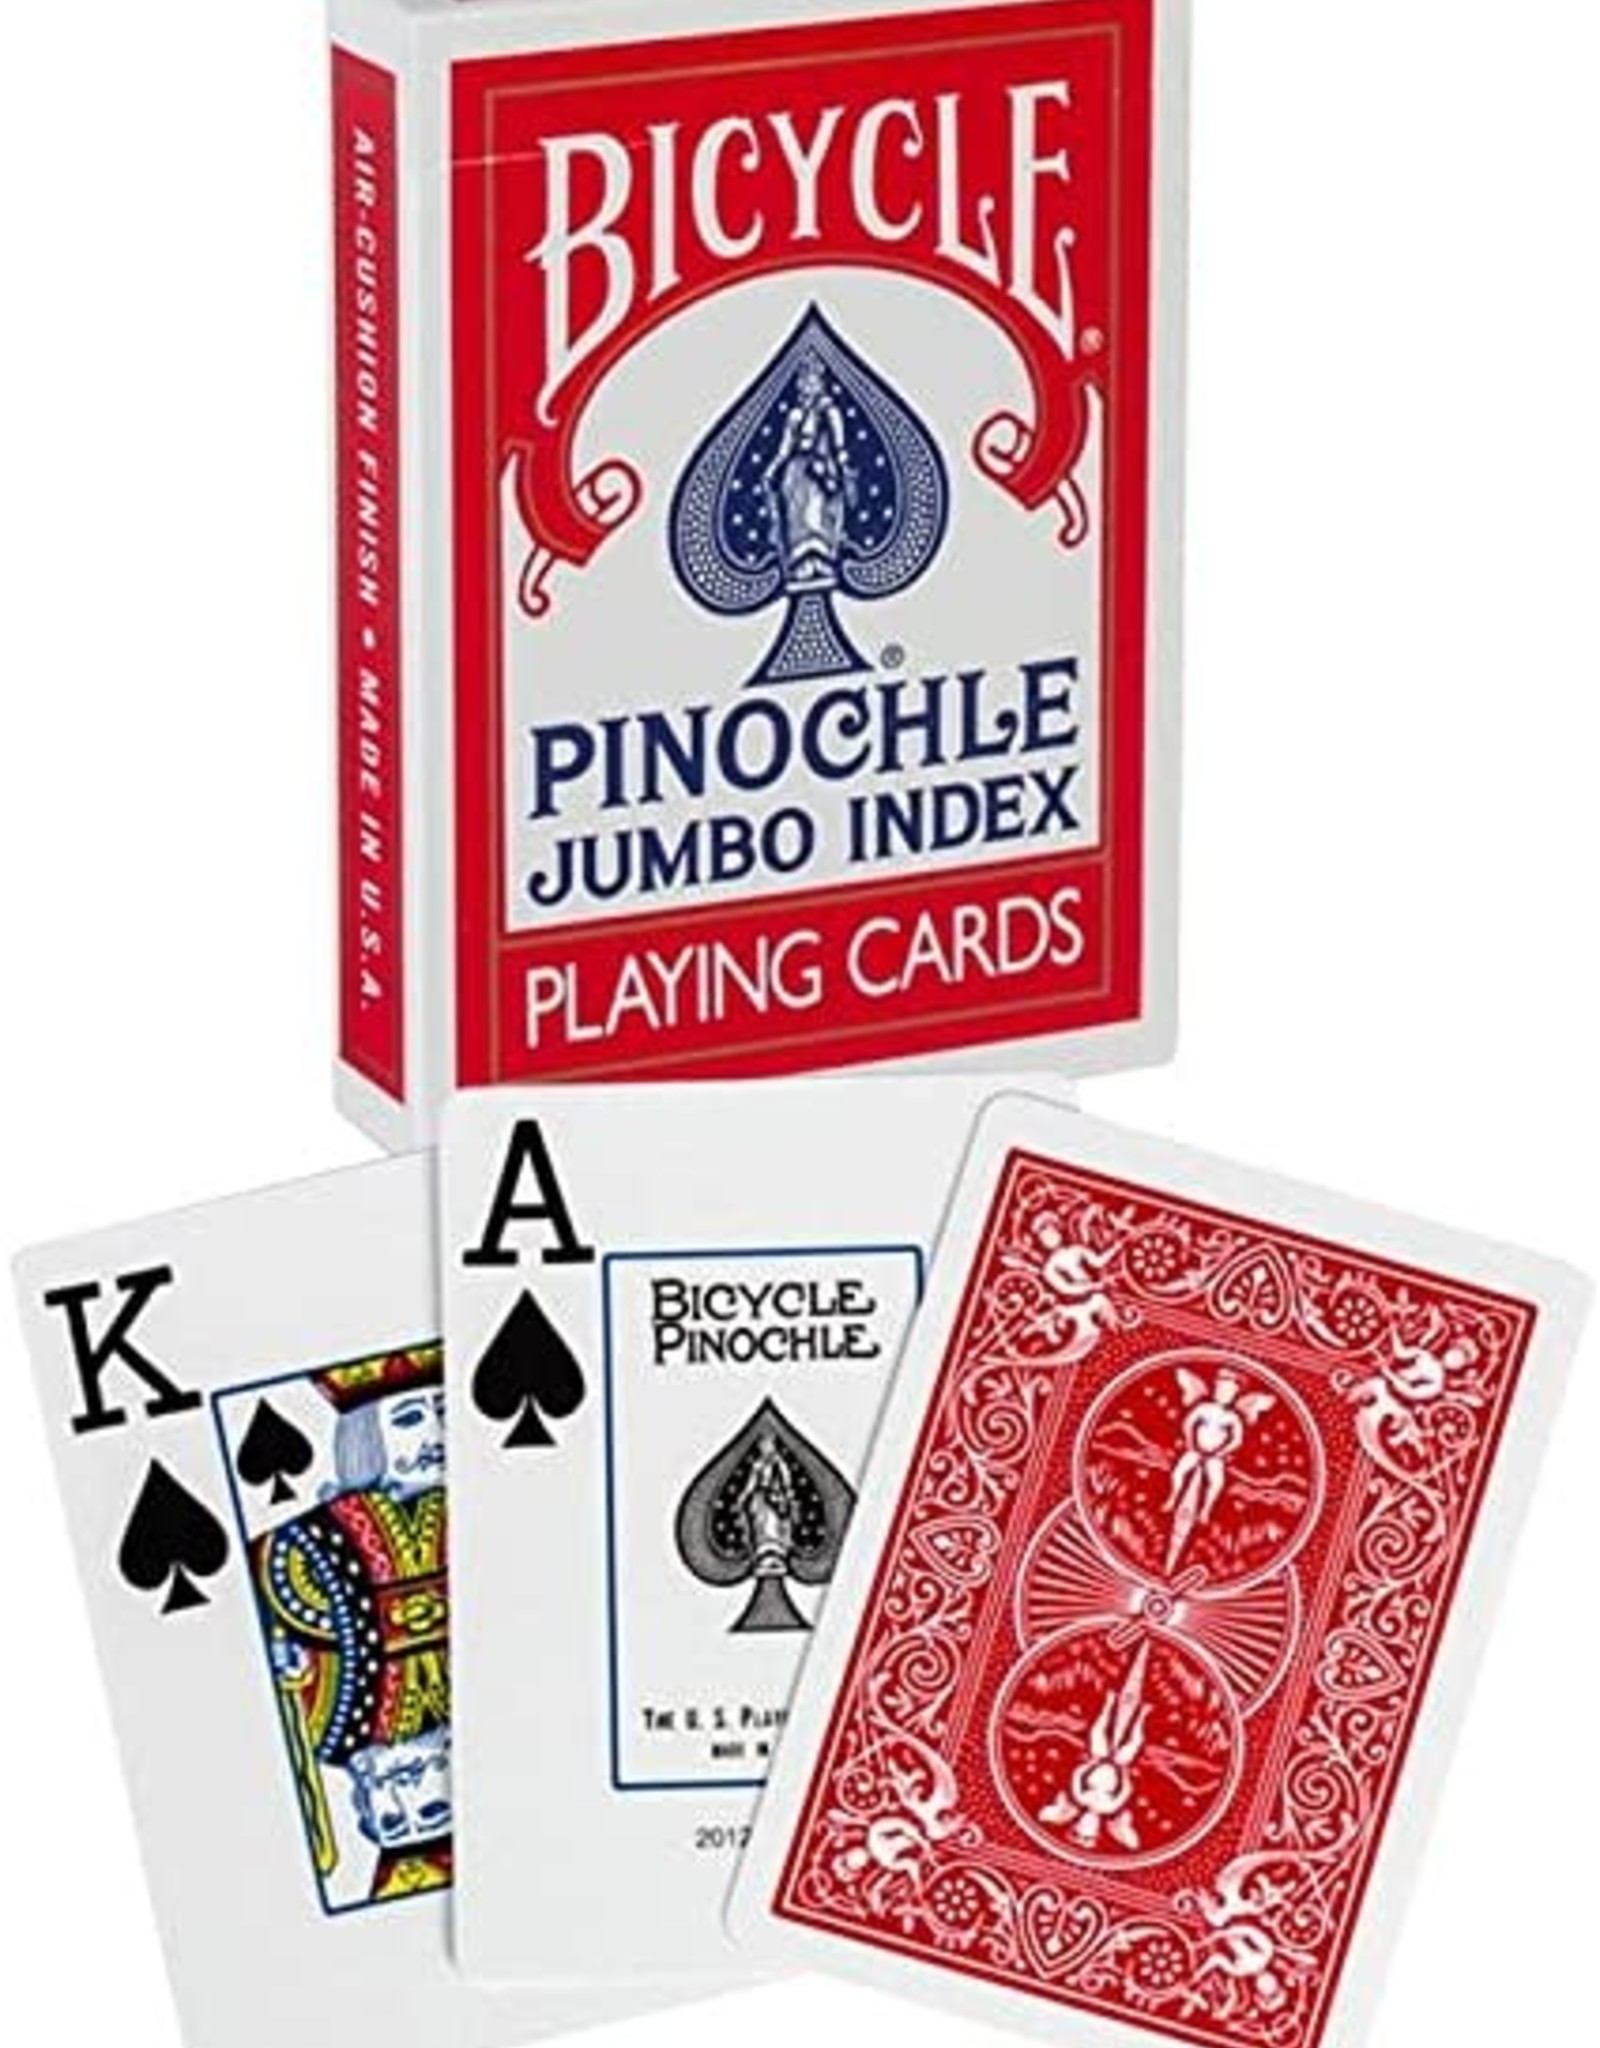 Bicycle Playing Cards: Pinochle Jumbo Index